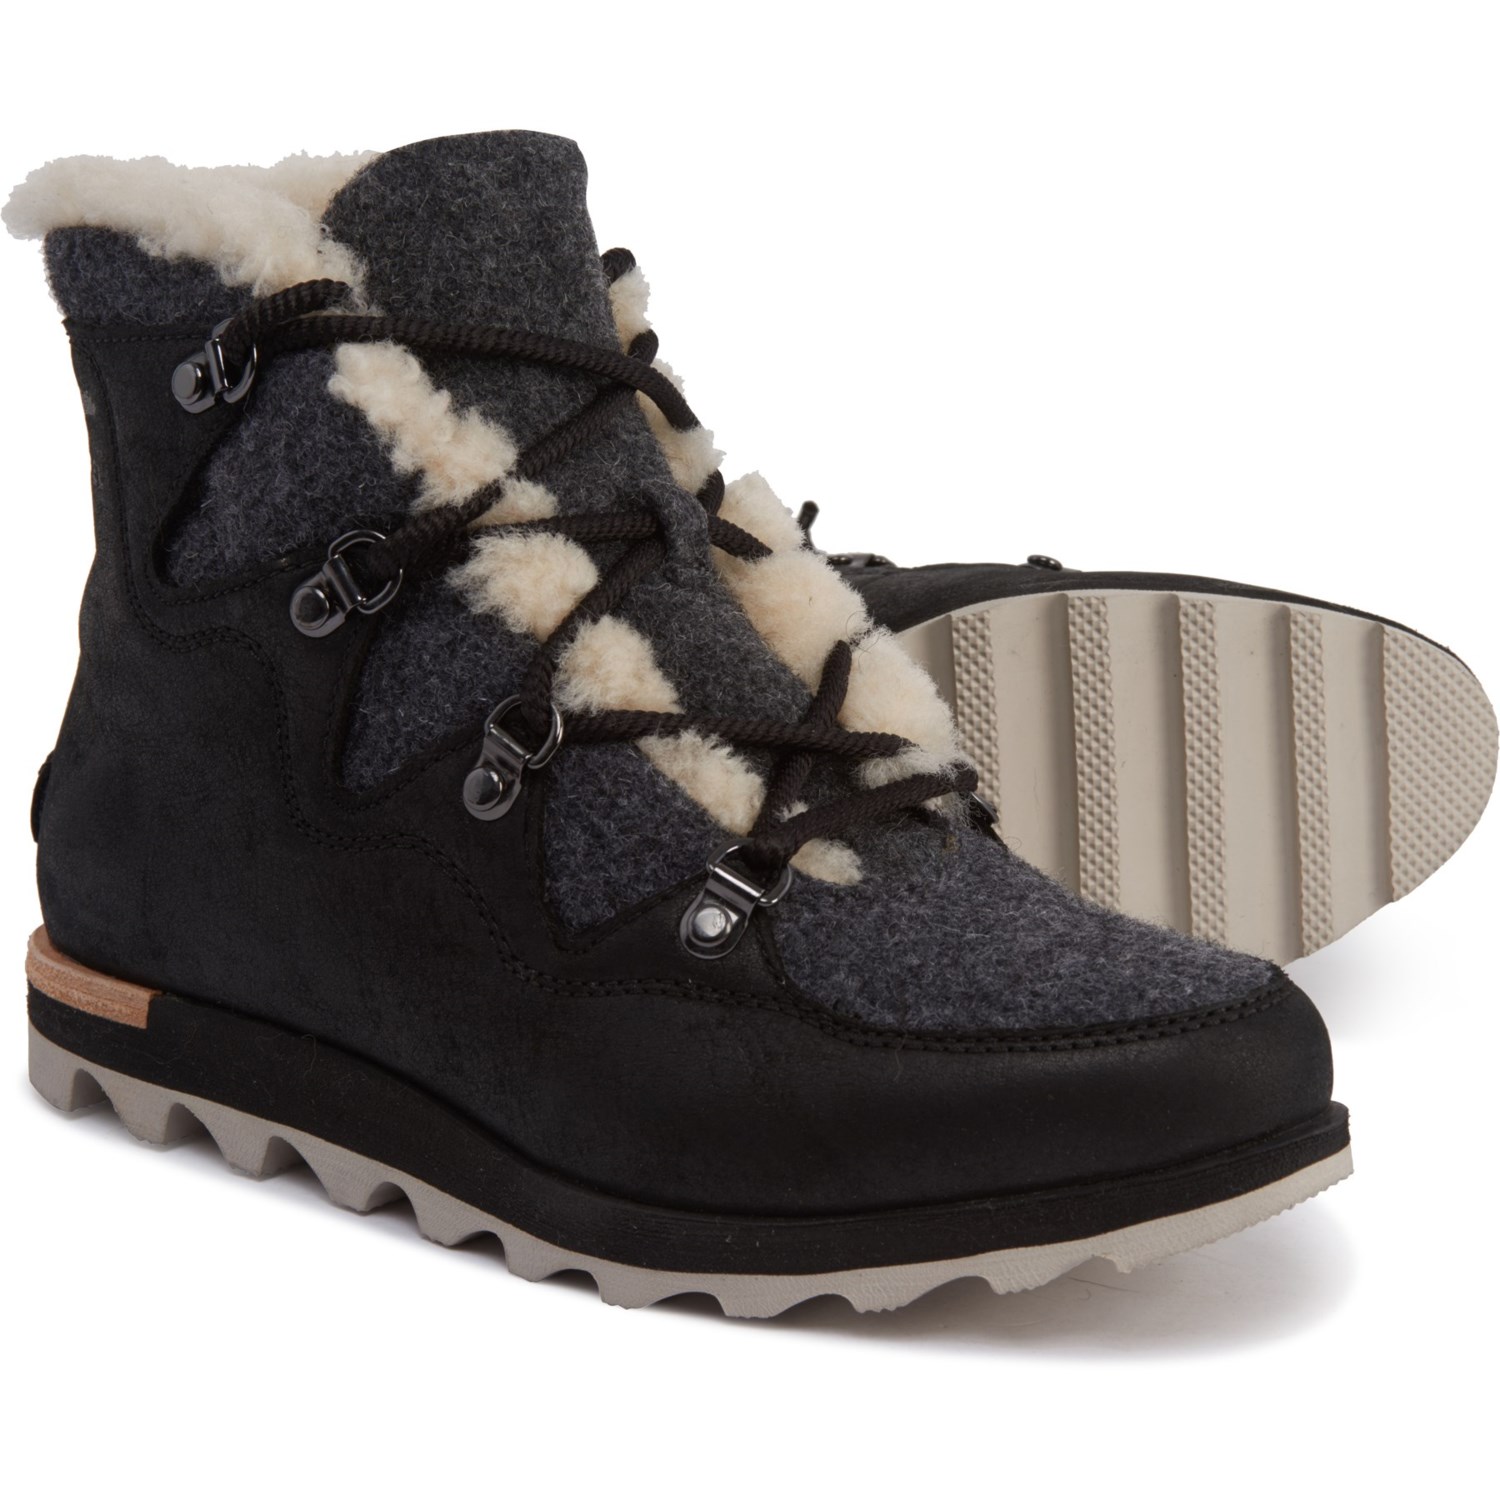 sneakchic alpine holiday boots by sorel